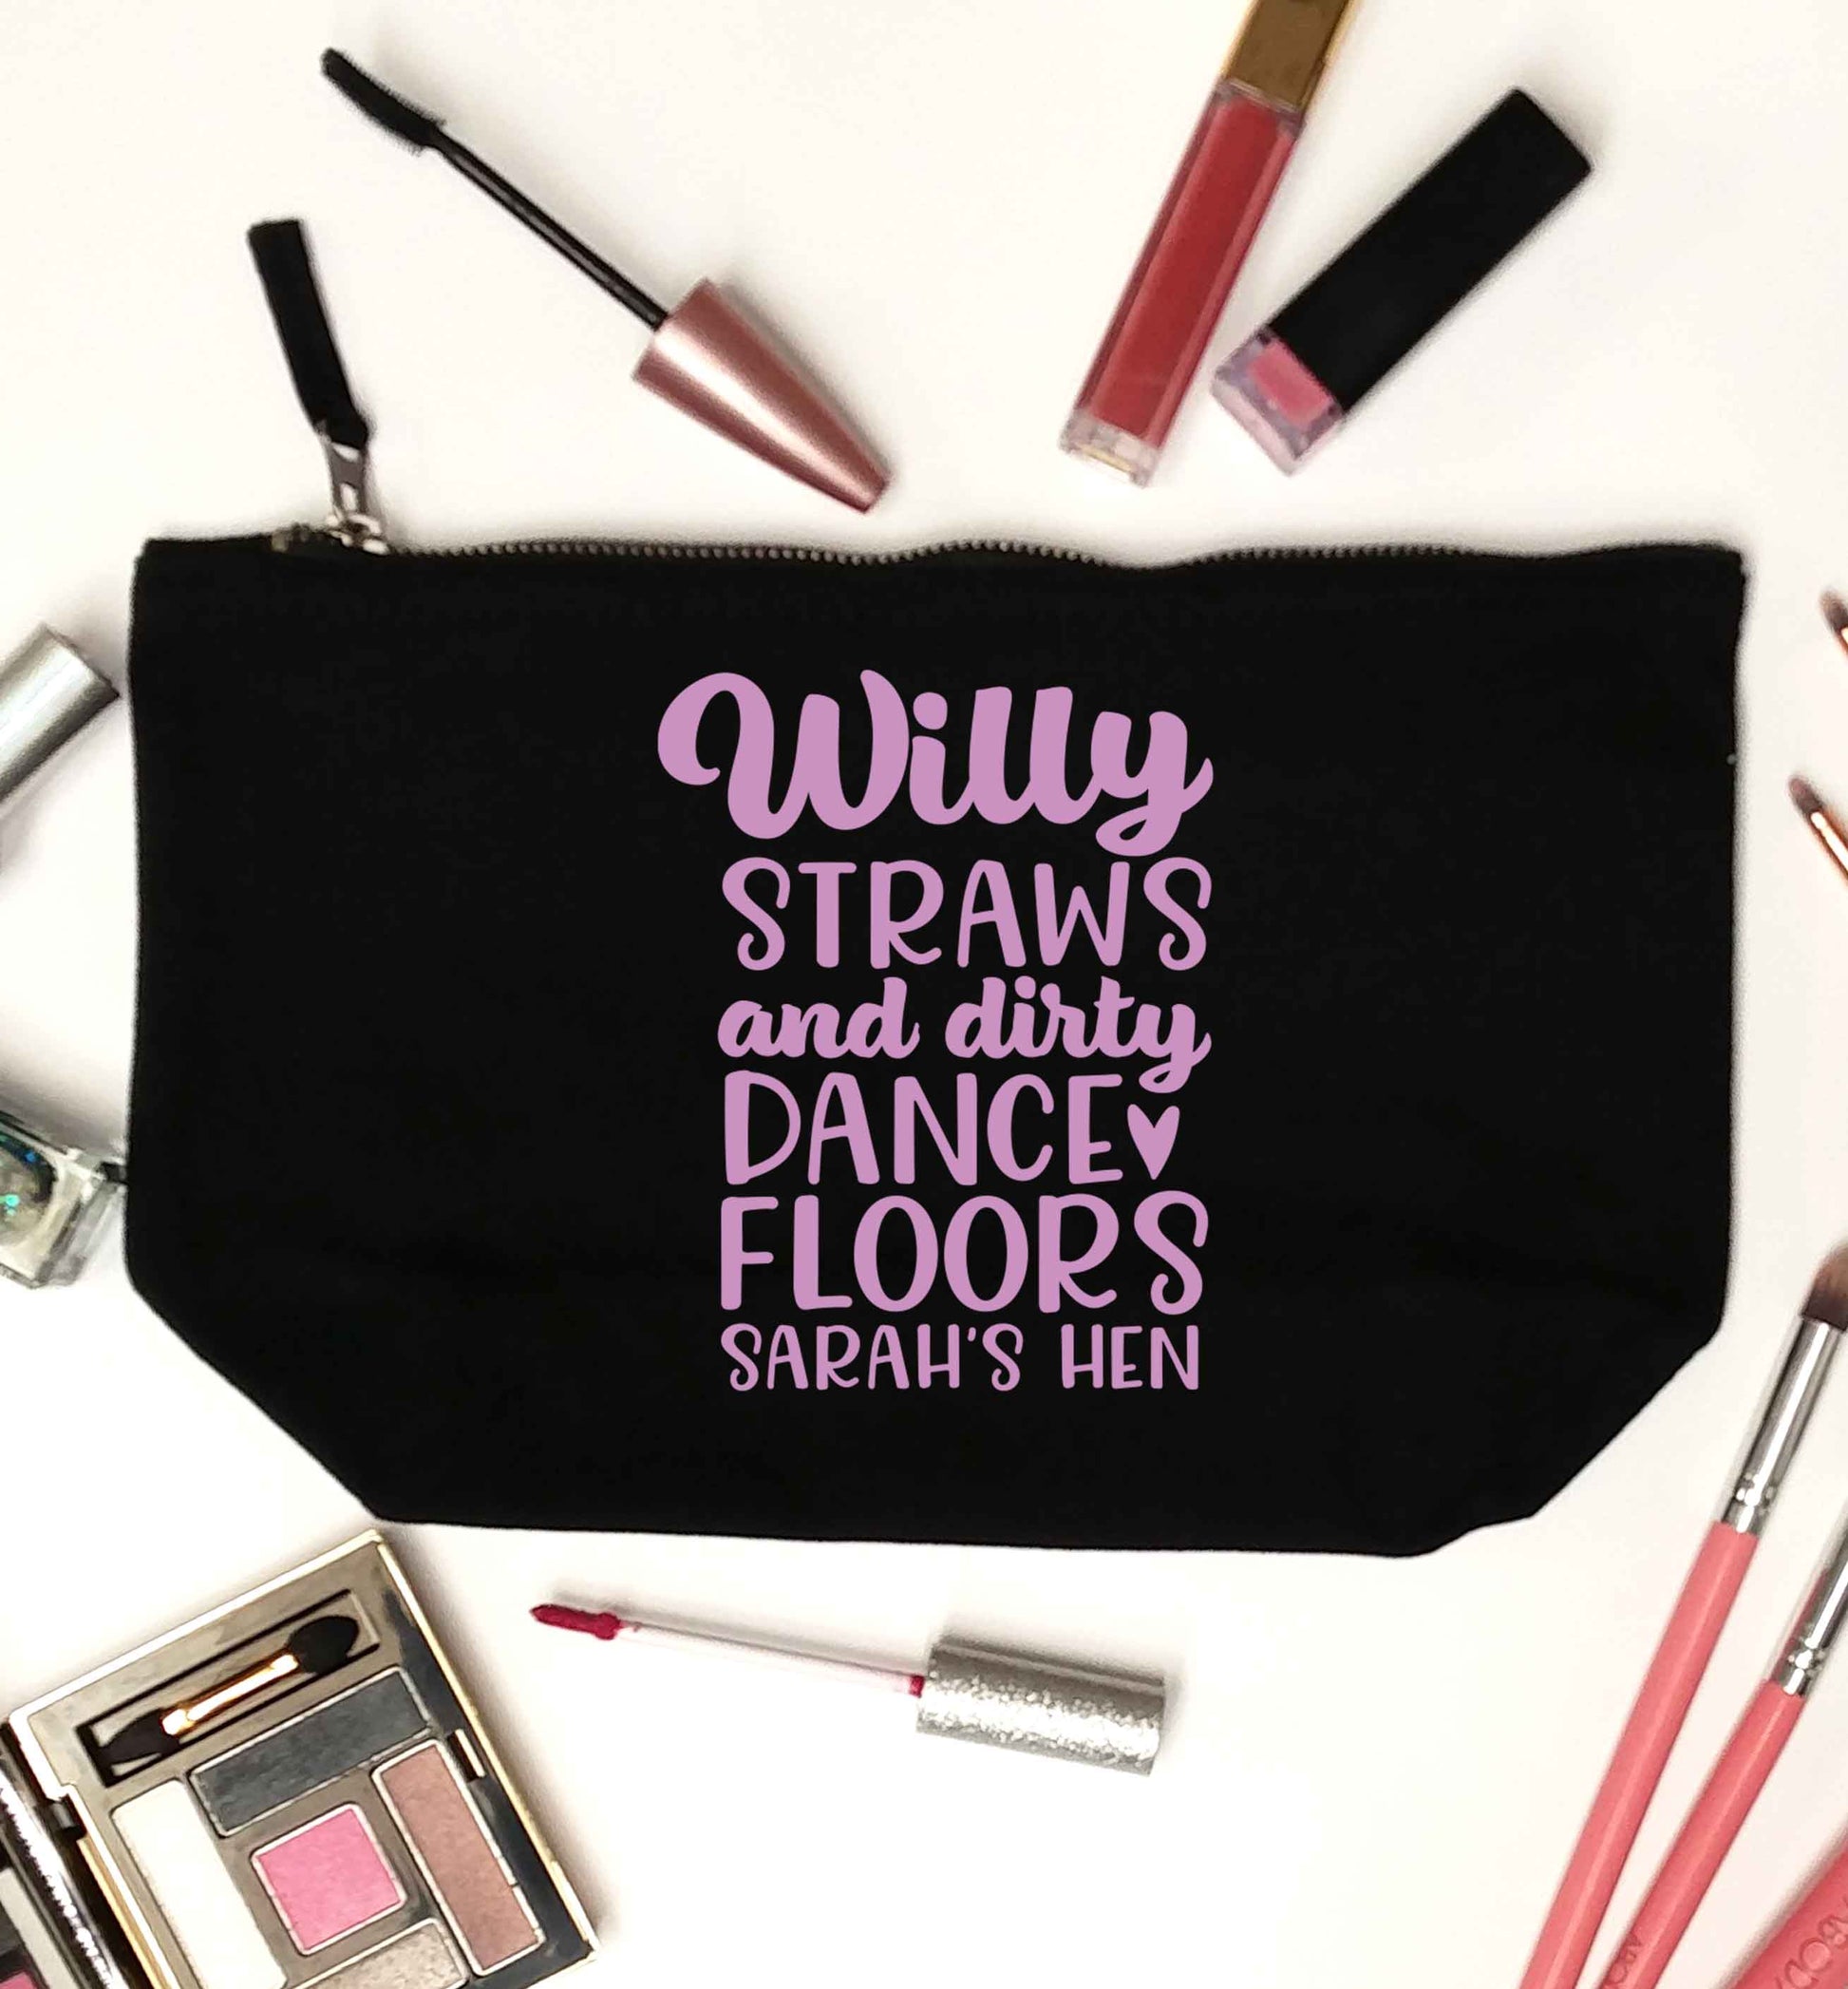 Willy straws and dirty dance floors black makeup bag